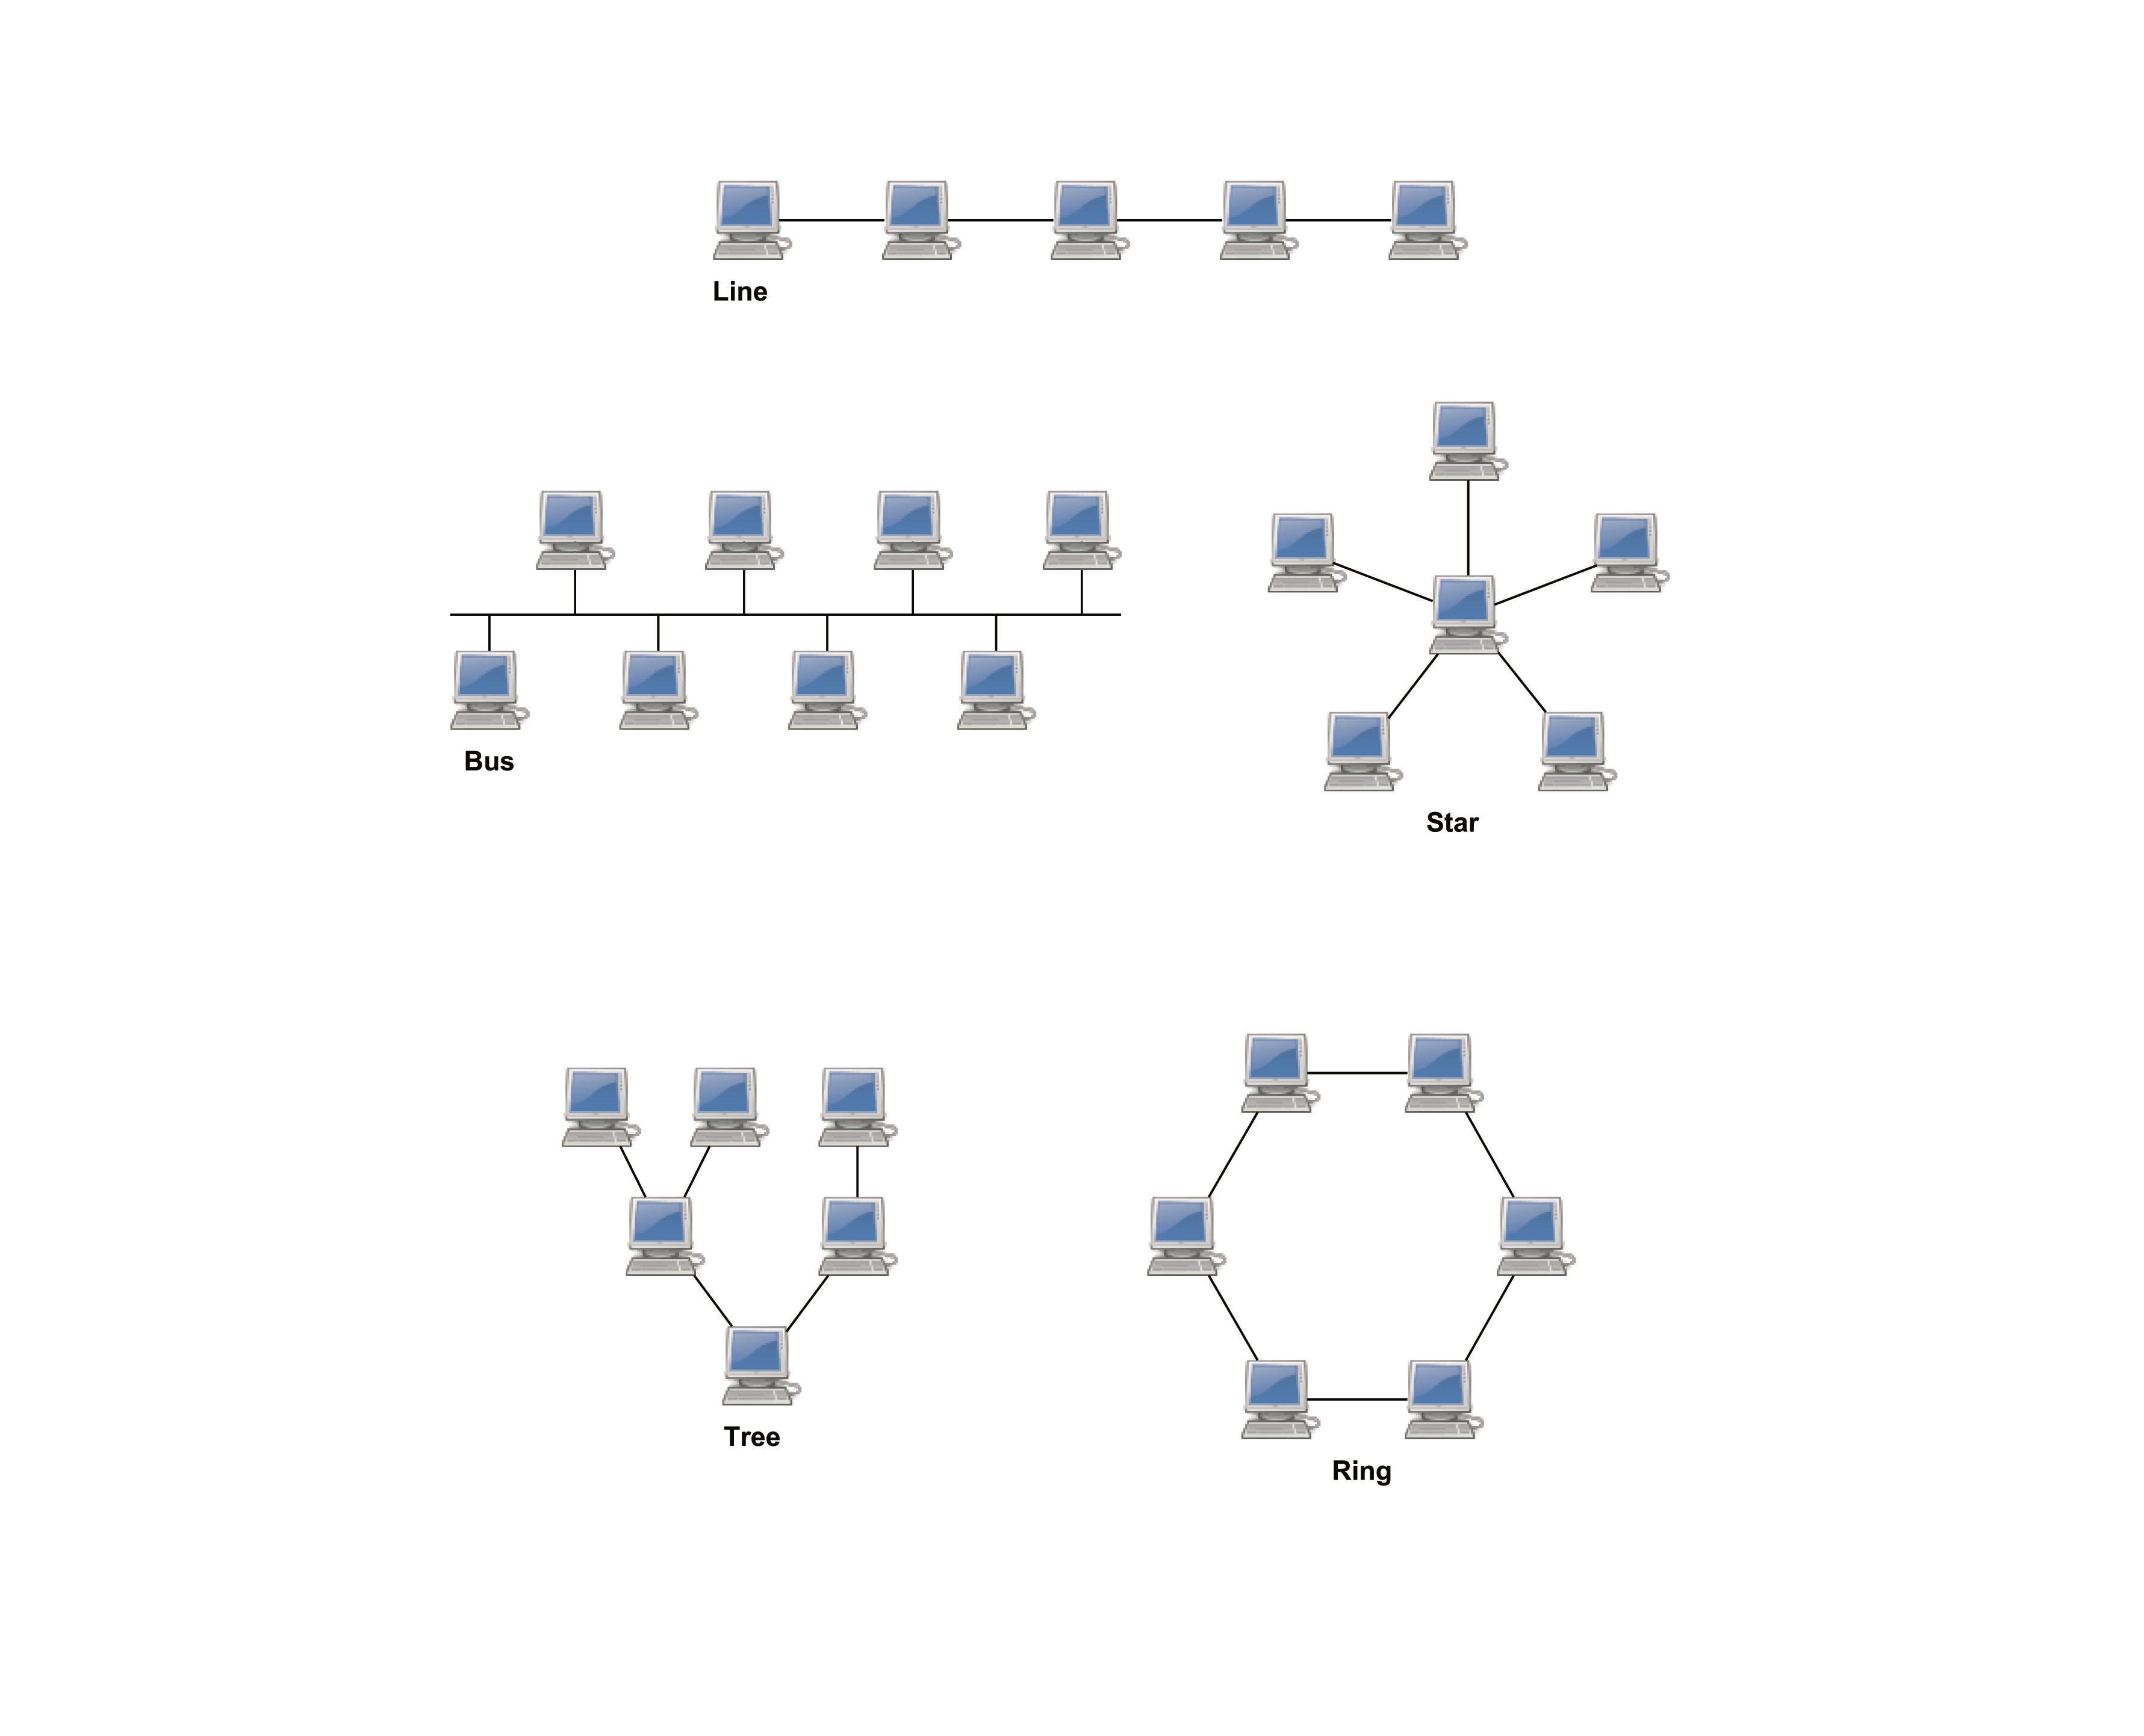 Architecture and topology of networks